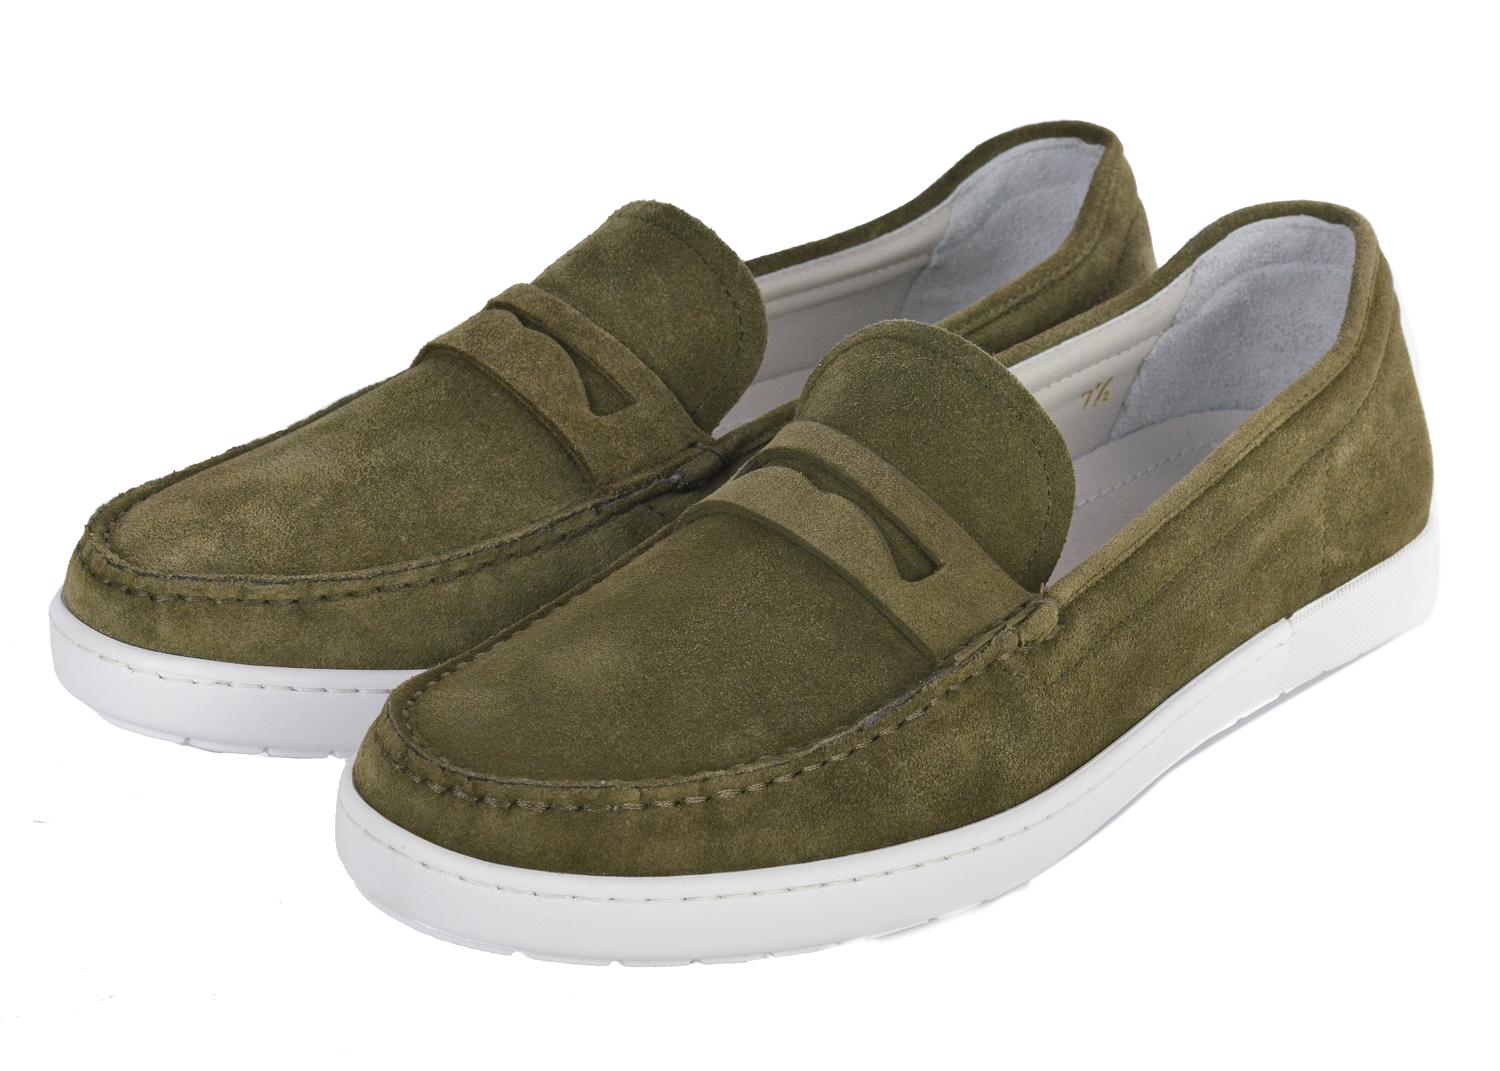 Take the time to embrace the moment in your Giorgio Armani Loafers. These shoes feature a autumnal green supple suede, crisp white rubber sole, and classic penny par. You can pair these shoes with a light brown jacket, crisp white top, and